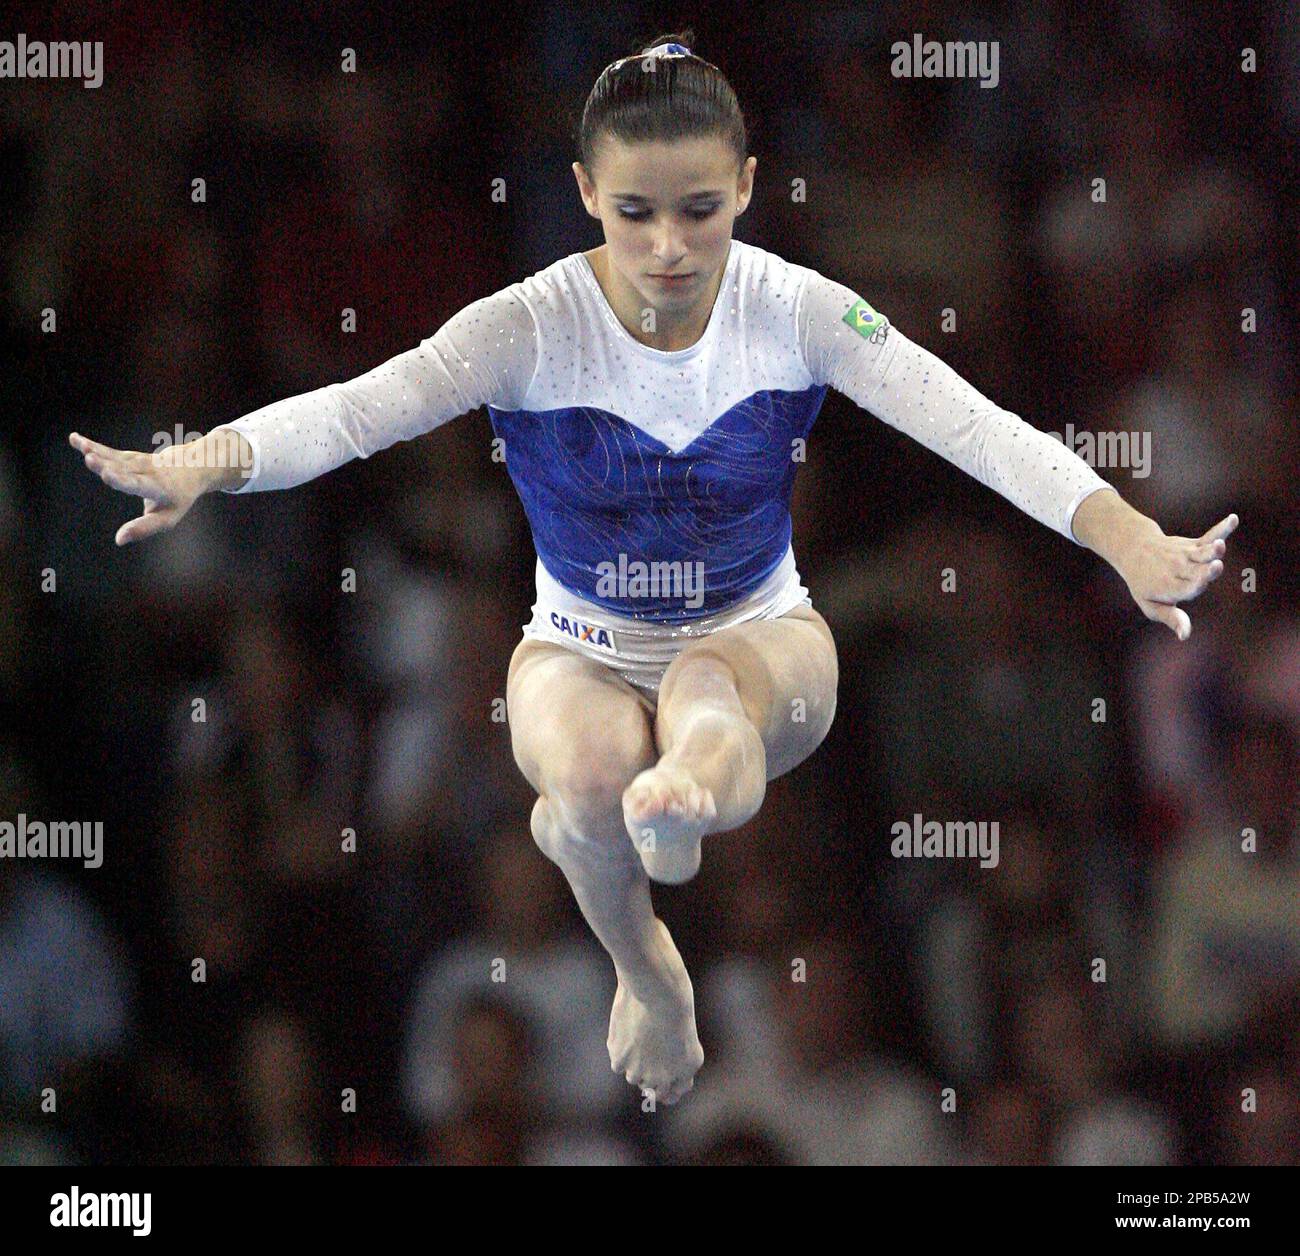 Joint bronze medalist Jade Barbosa from Brazil competes on the beam during the Women's Individual All Around final of the Gymnastics World Championships in Stuttgart, southern Germany, on Friday, Sept. 7, 2007. The 40th Gymnastics World Championships take place in Stuttgart from Sept. 1 to Sept. 9, 2007. (AP Photo/Michael Sohn) Stock Photo